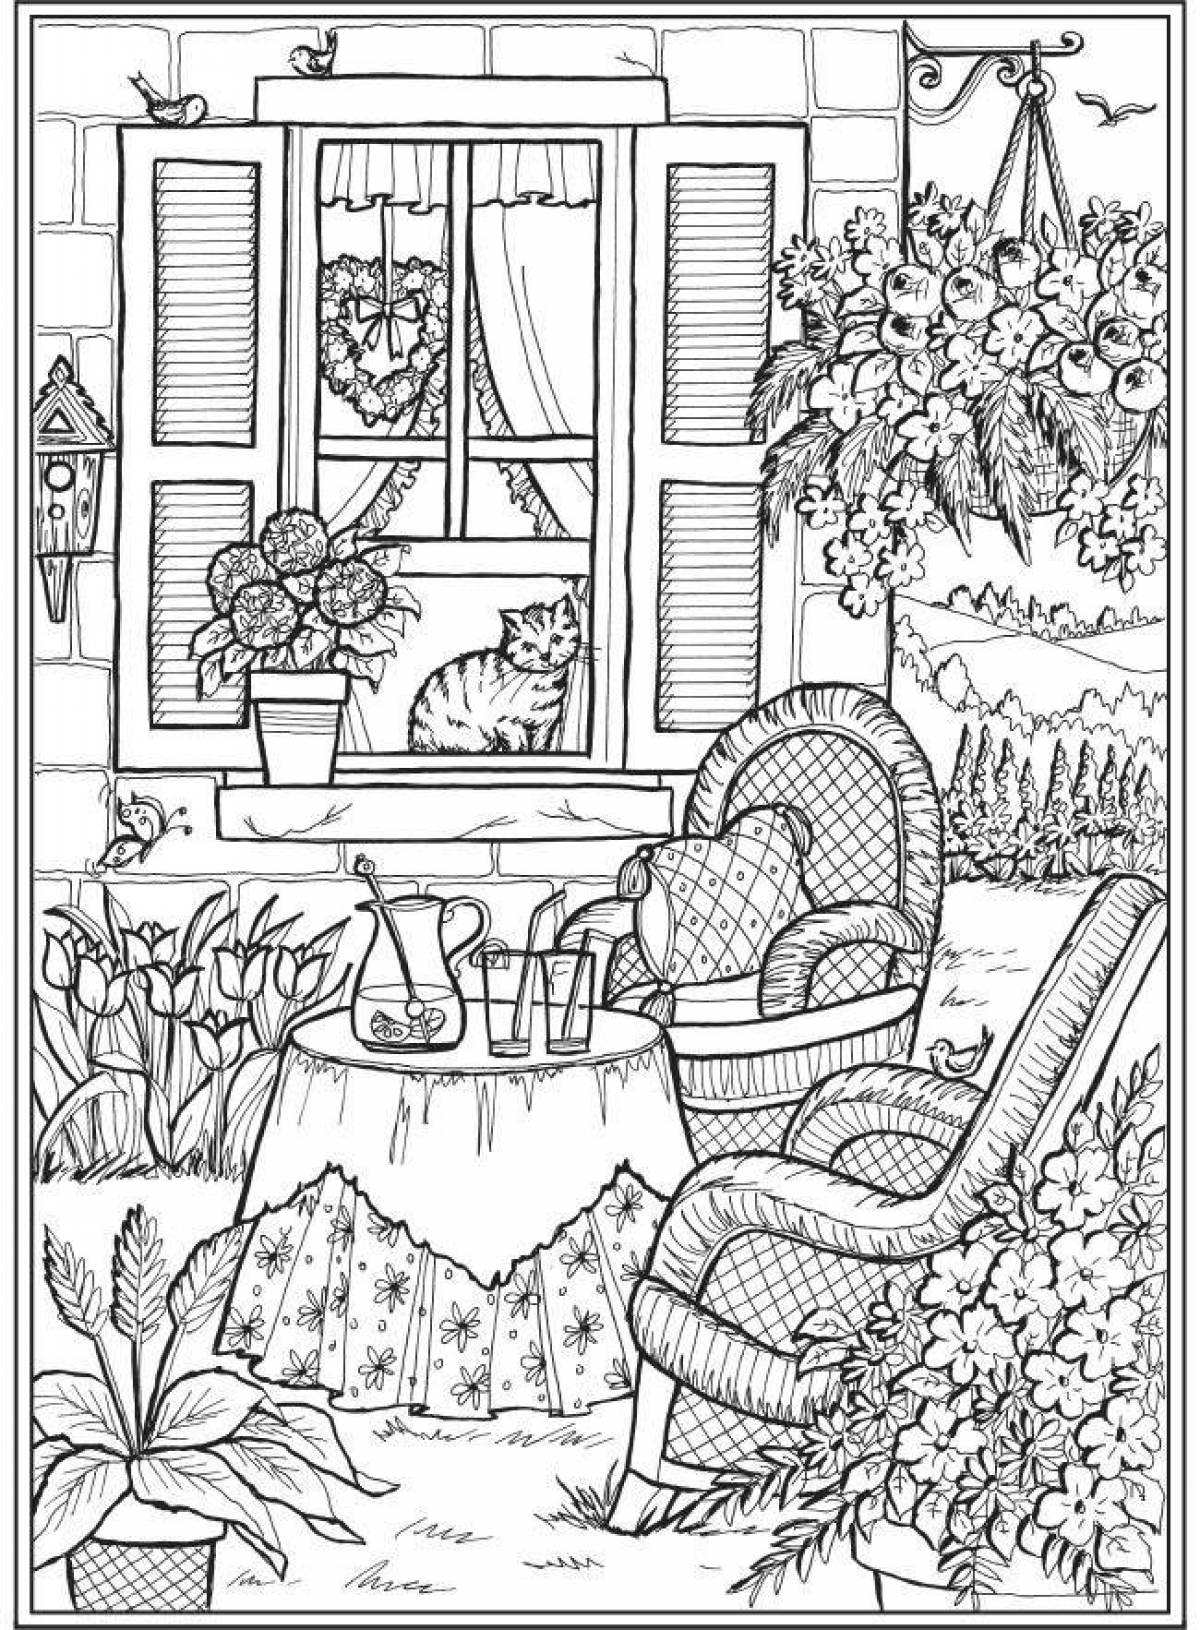 Coloring page creative haven - peaceful